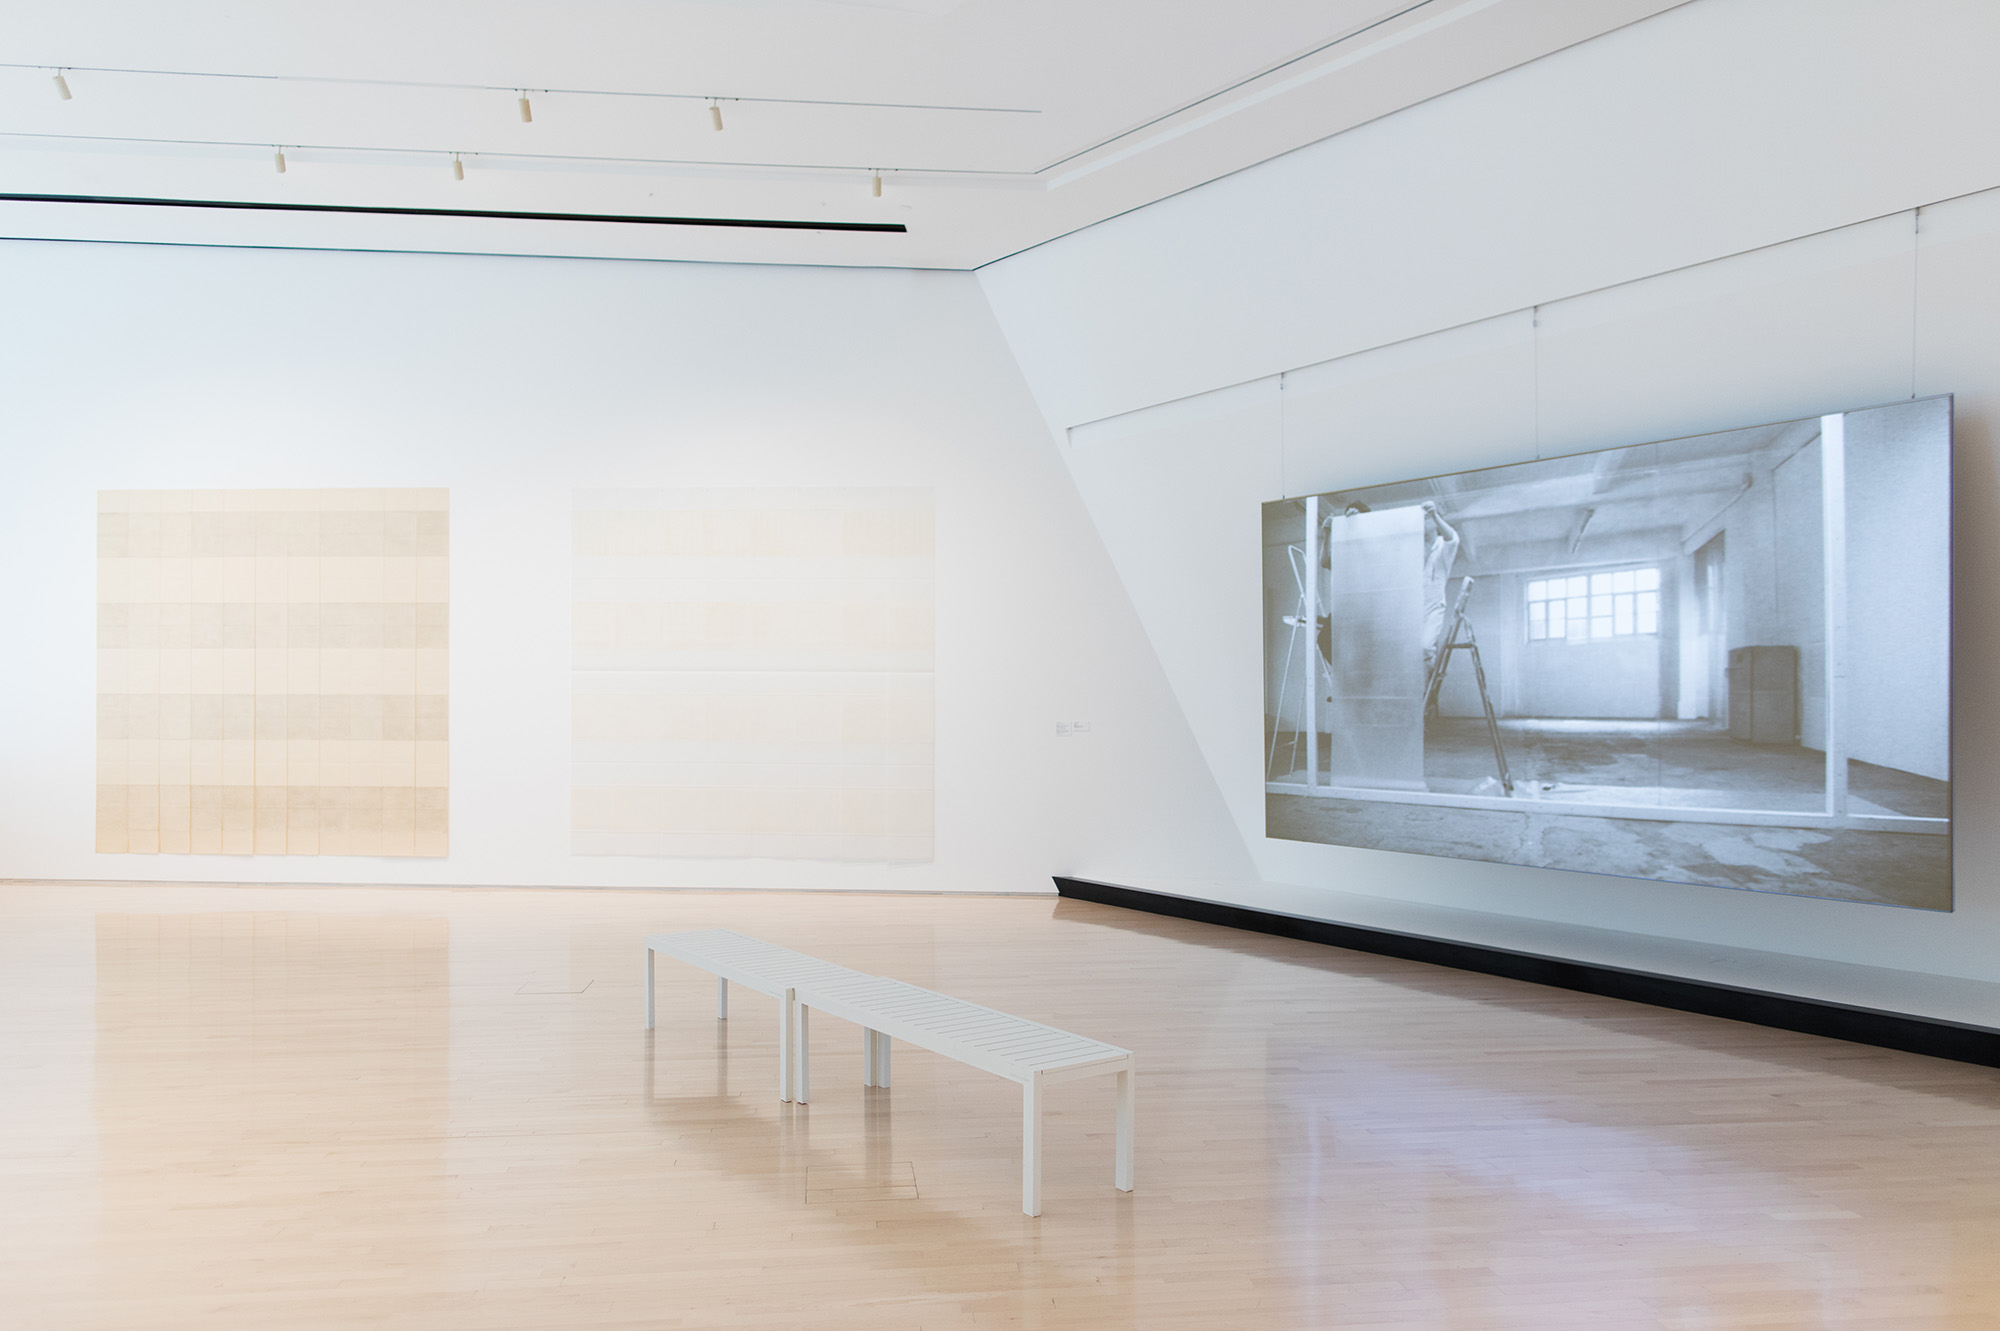 <i>Michel Parmentier</i>, installation view at the Eli and Edythe Broad Art Museum at Michigan State University, 2018. Photo: Eat Pomegranate Photography